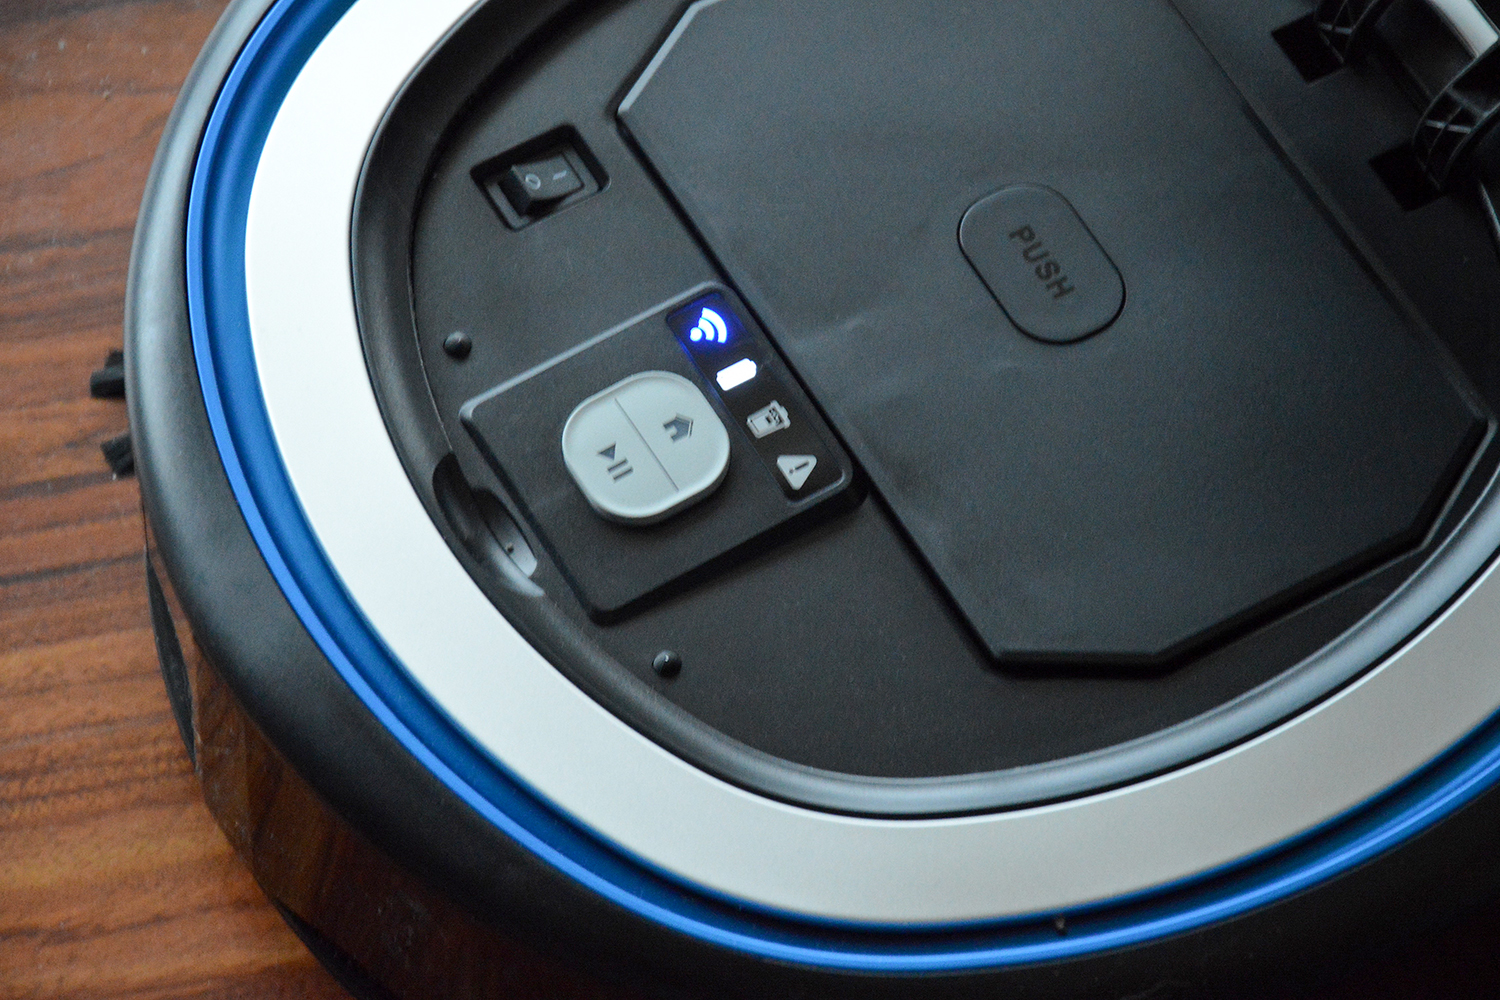 Hoover Rogue 970 robot vacuum review WiFi